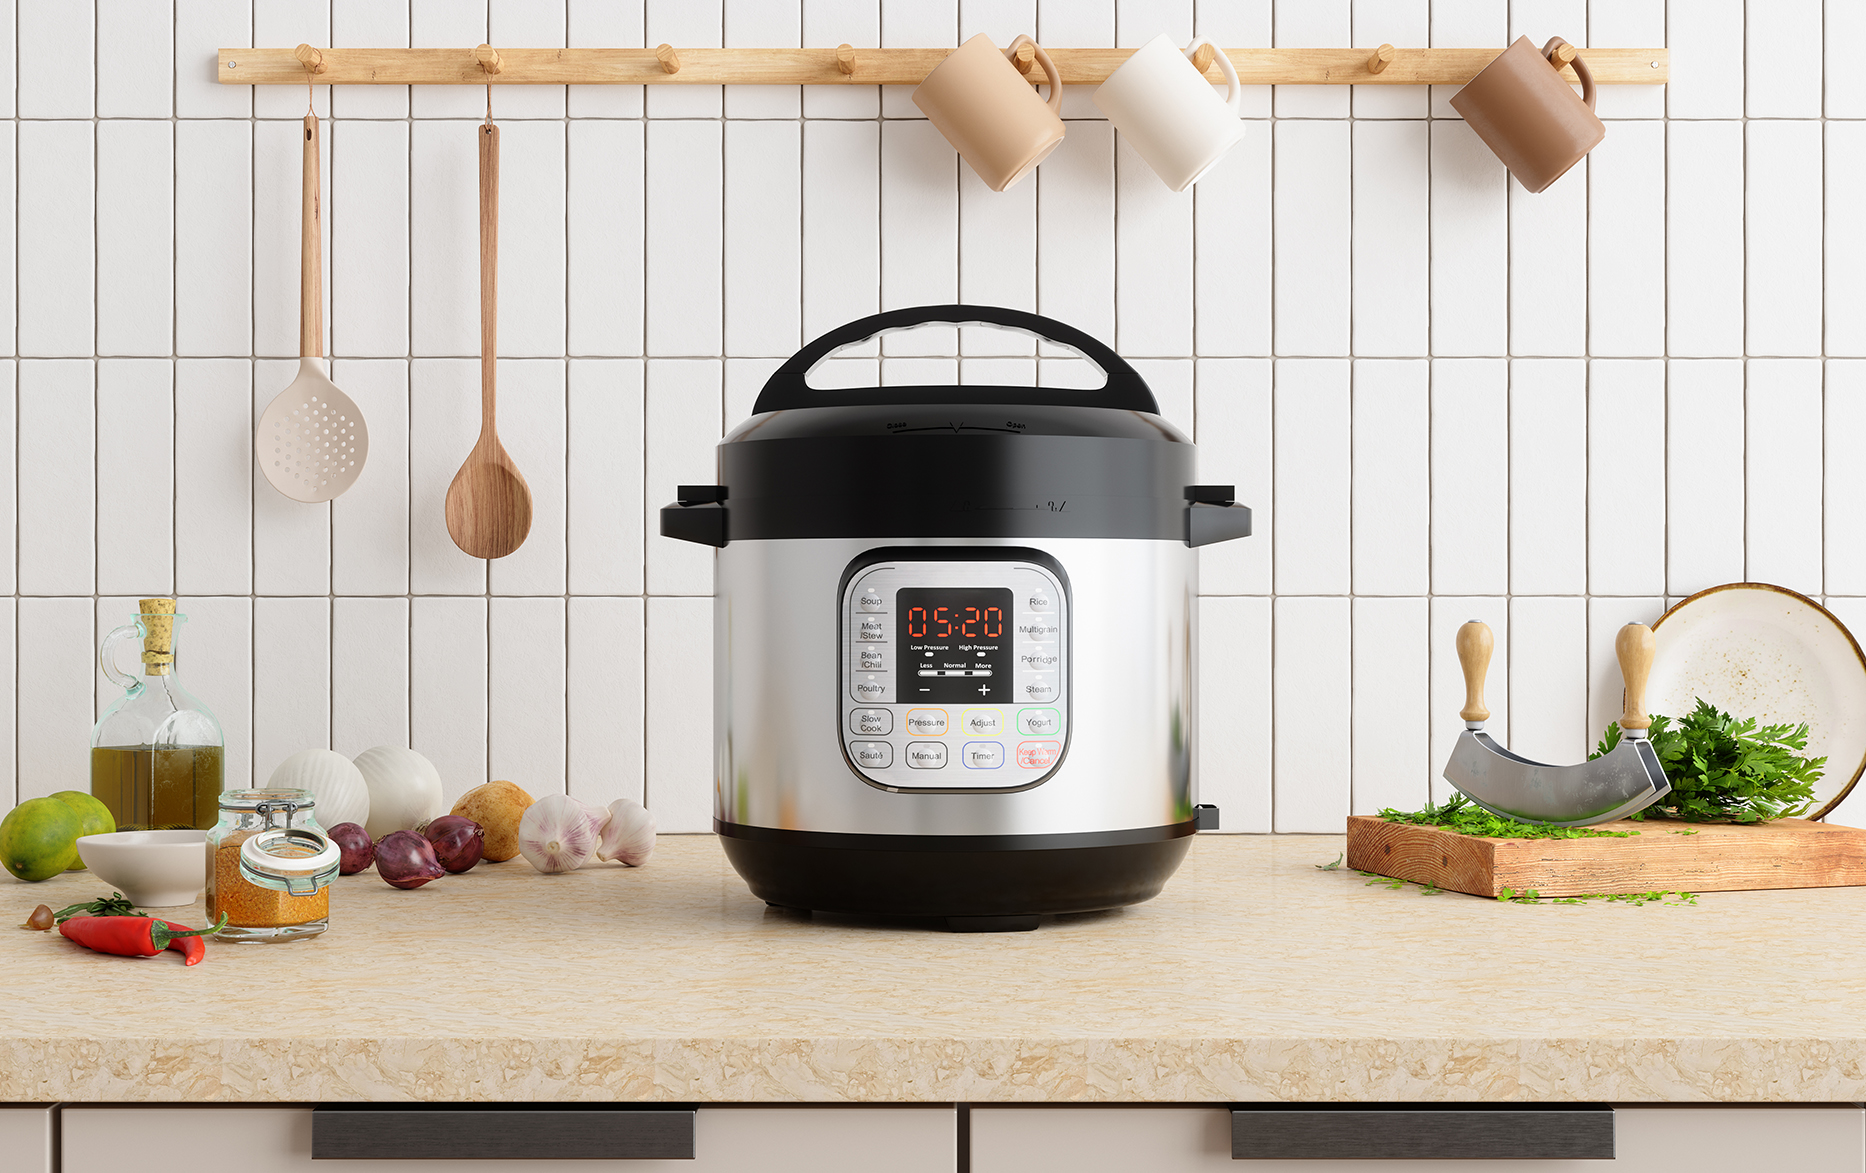 How to Clean a Slow Cooker